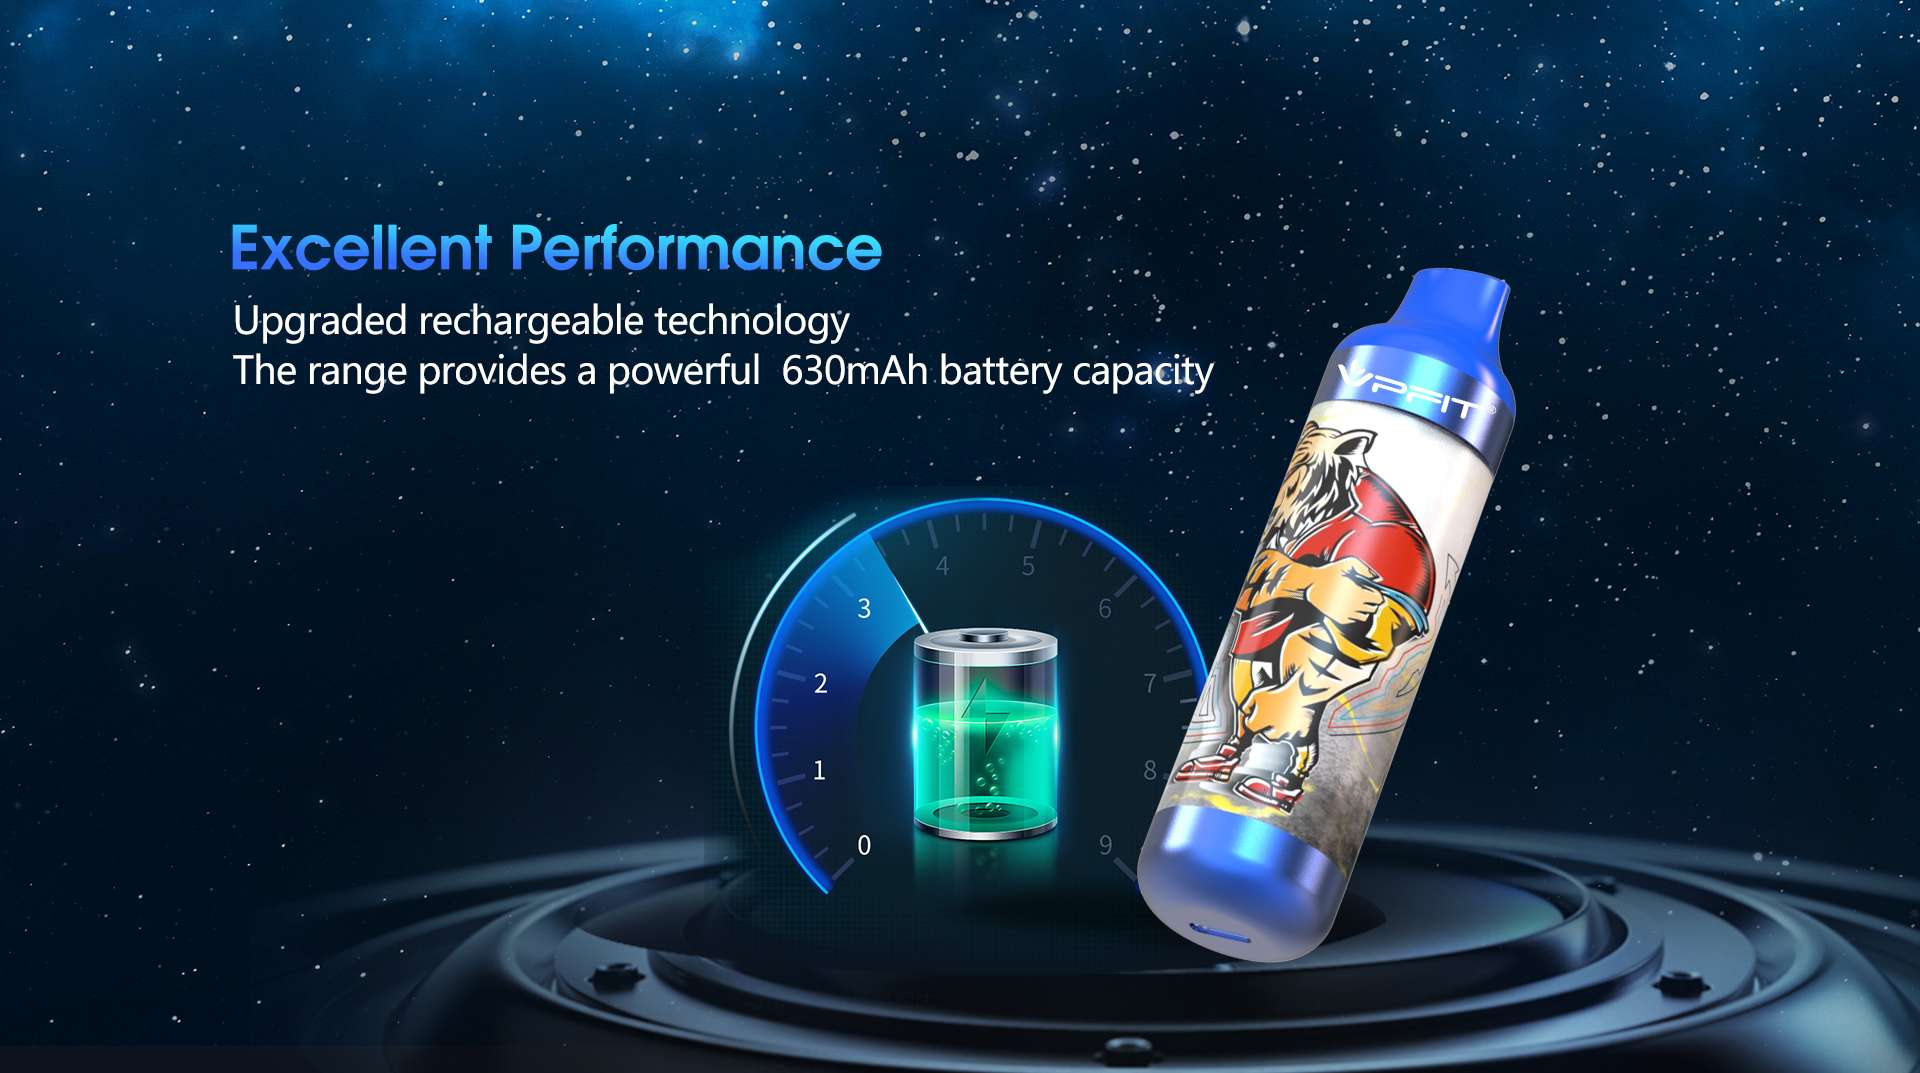 Excellent performance 630mAh upgraded recharge technology